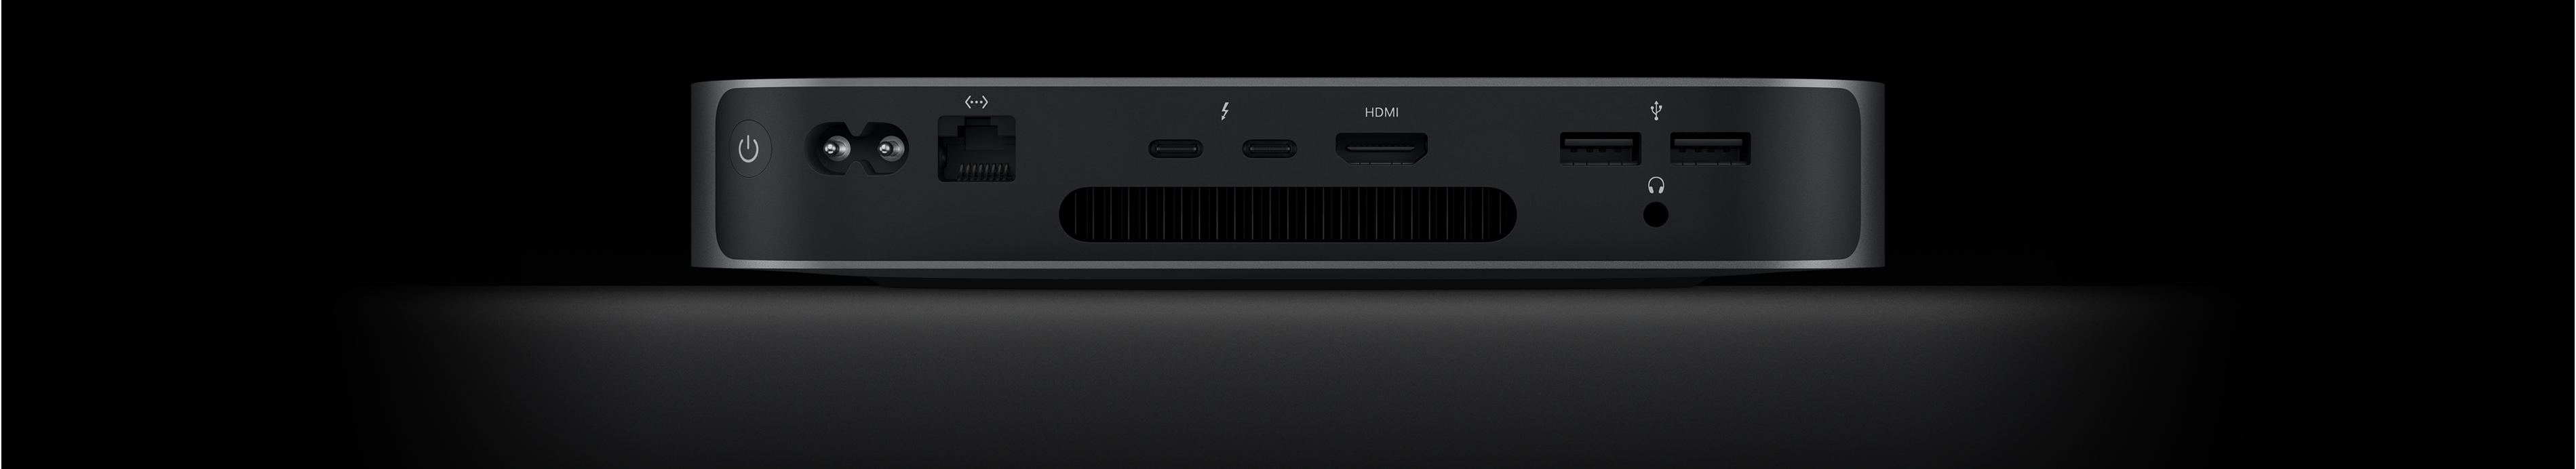 Back view of Mac mini showing the two Thunderbolt 4 ports, HDMI port, two USB-A ports, headphone jack, Gigabit Ethernet port, power port, and power button.